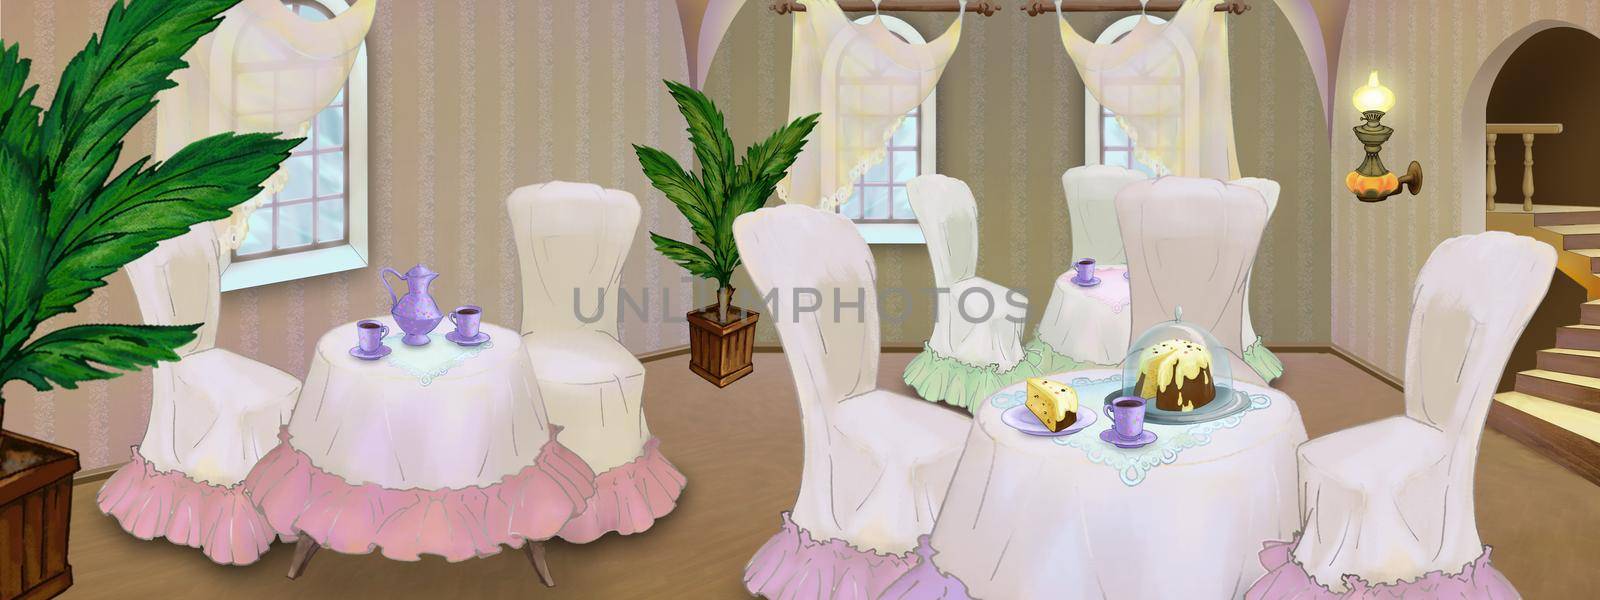 Cafe interior in retro style. Digital Painting Background, Illustration.